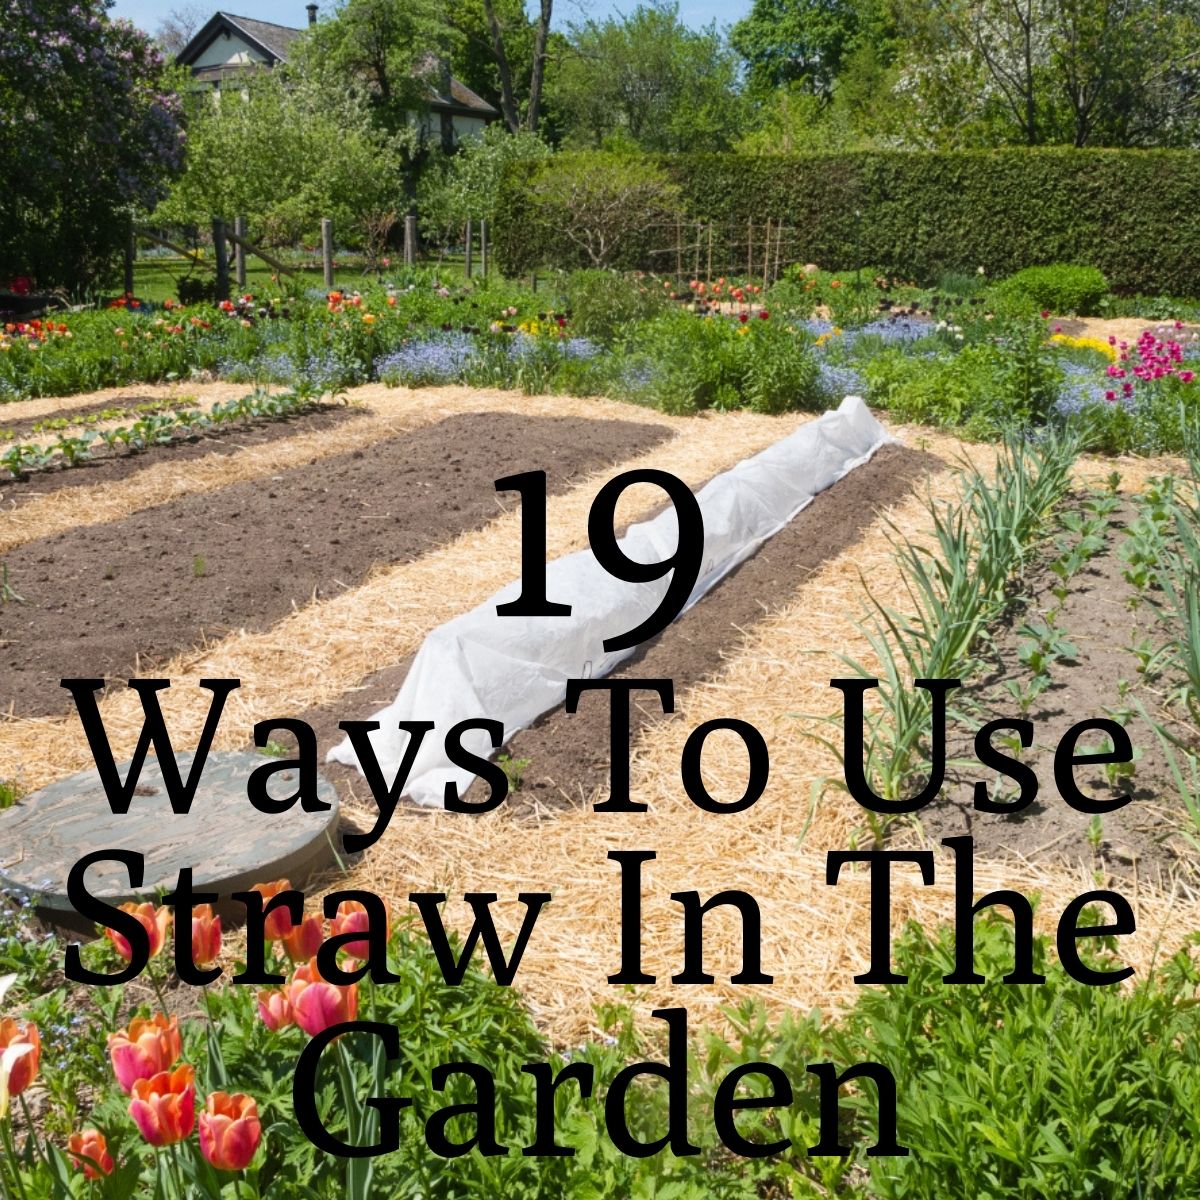 Putting Straw on a Garden for Winter: 11 Advantages